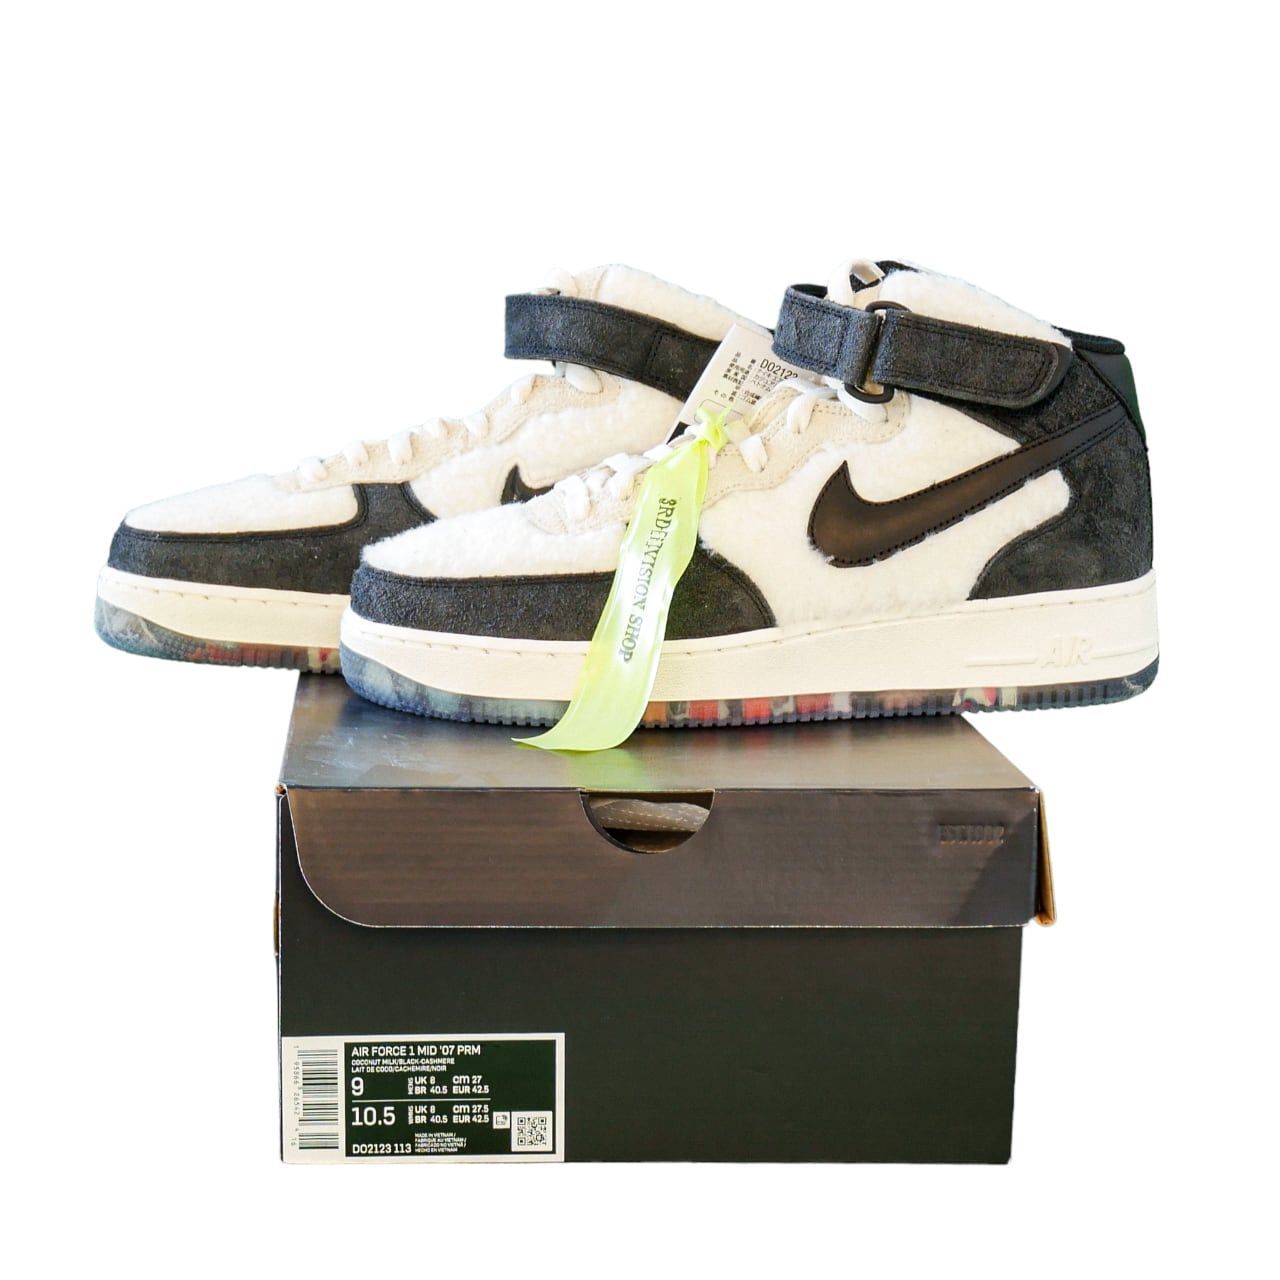 Nike ナイキ Air Force 1 Mid '07 PRM Culture Day エアフォース1 上野